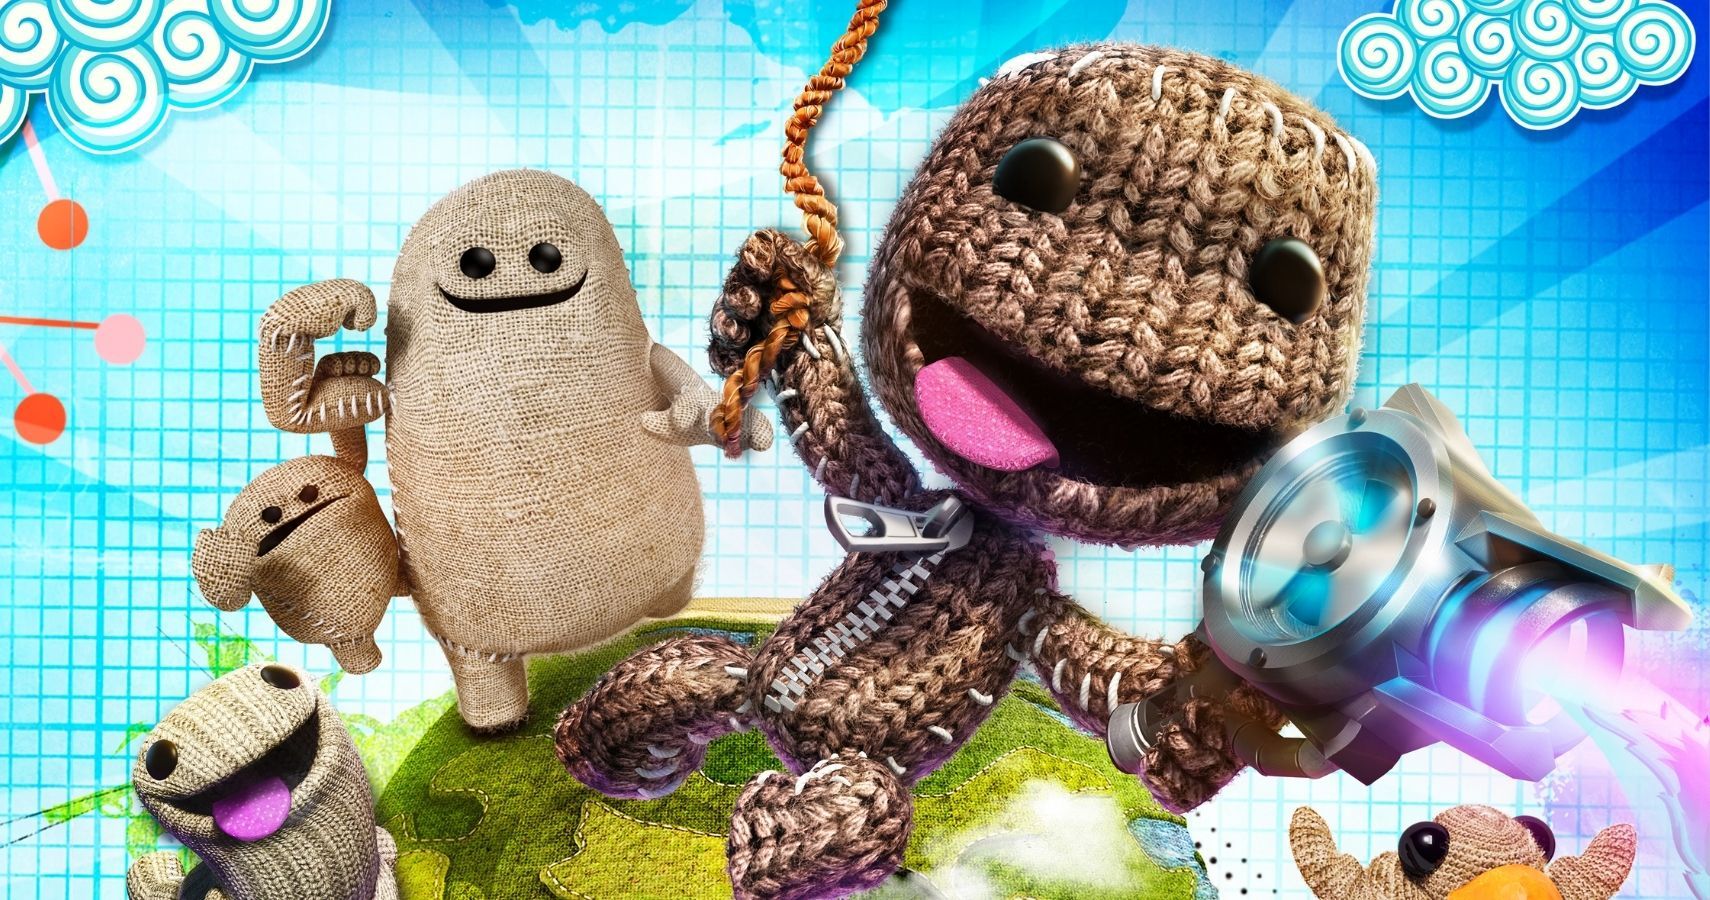 Cover art for Little Big Planet 3, featuring Sack Boy